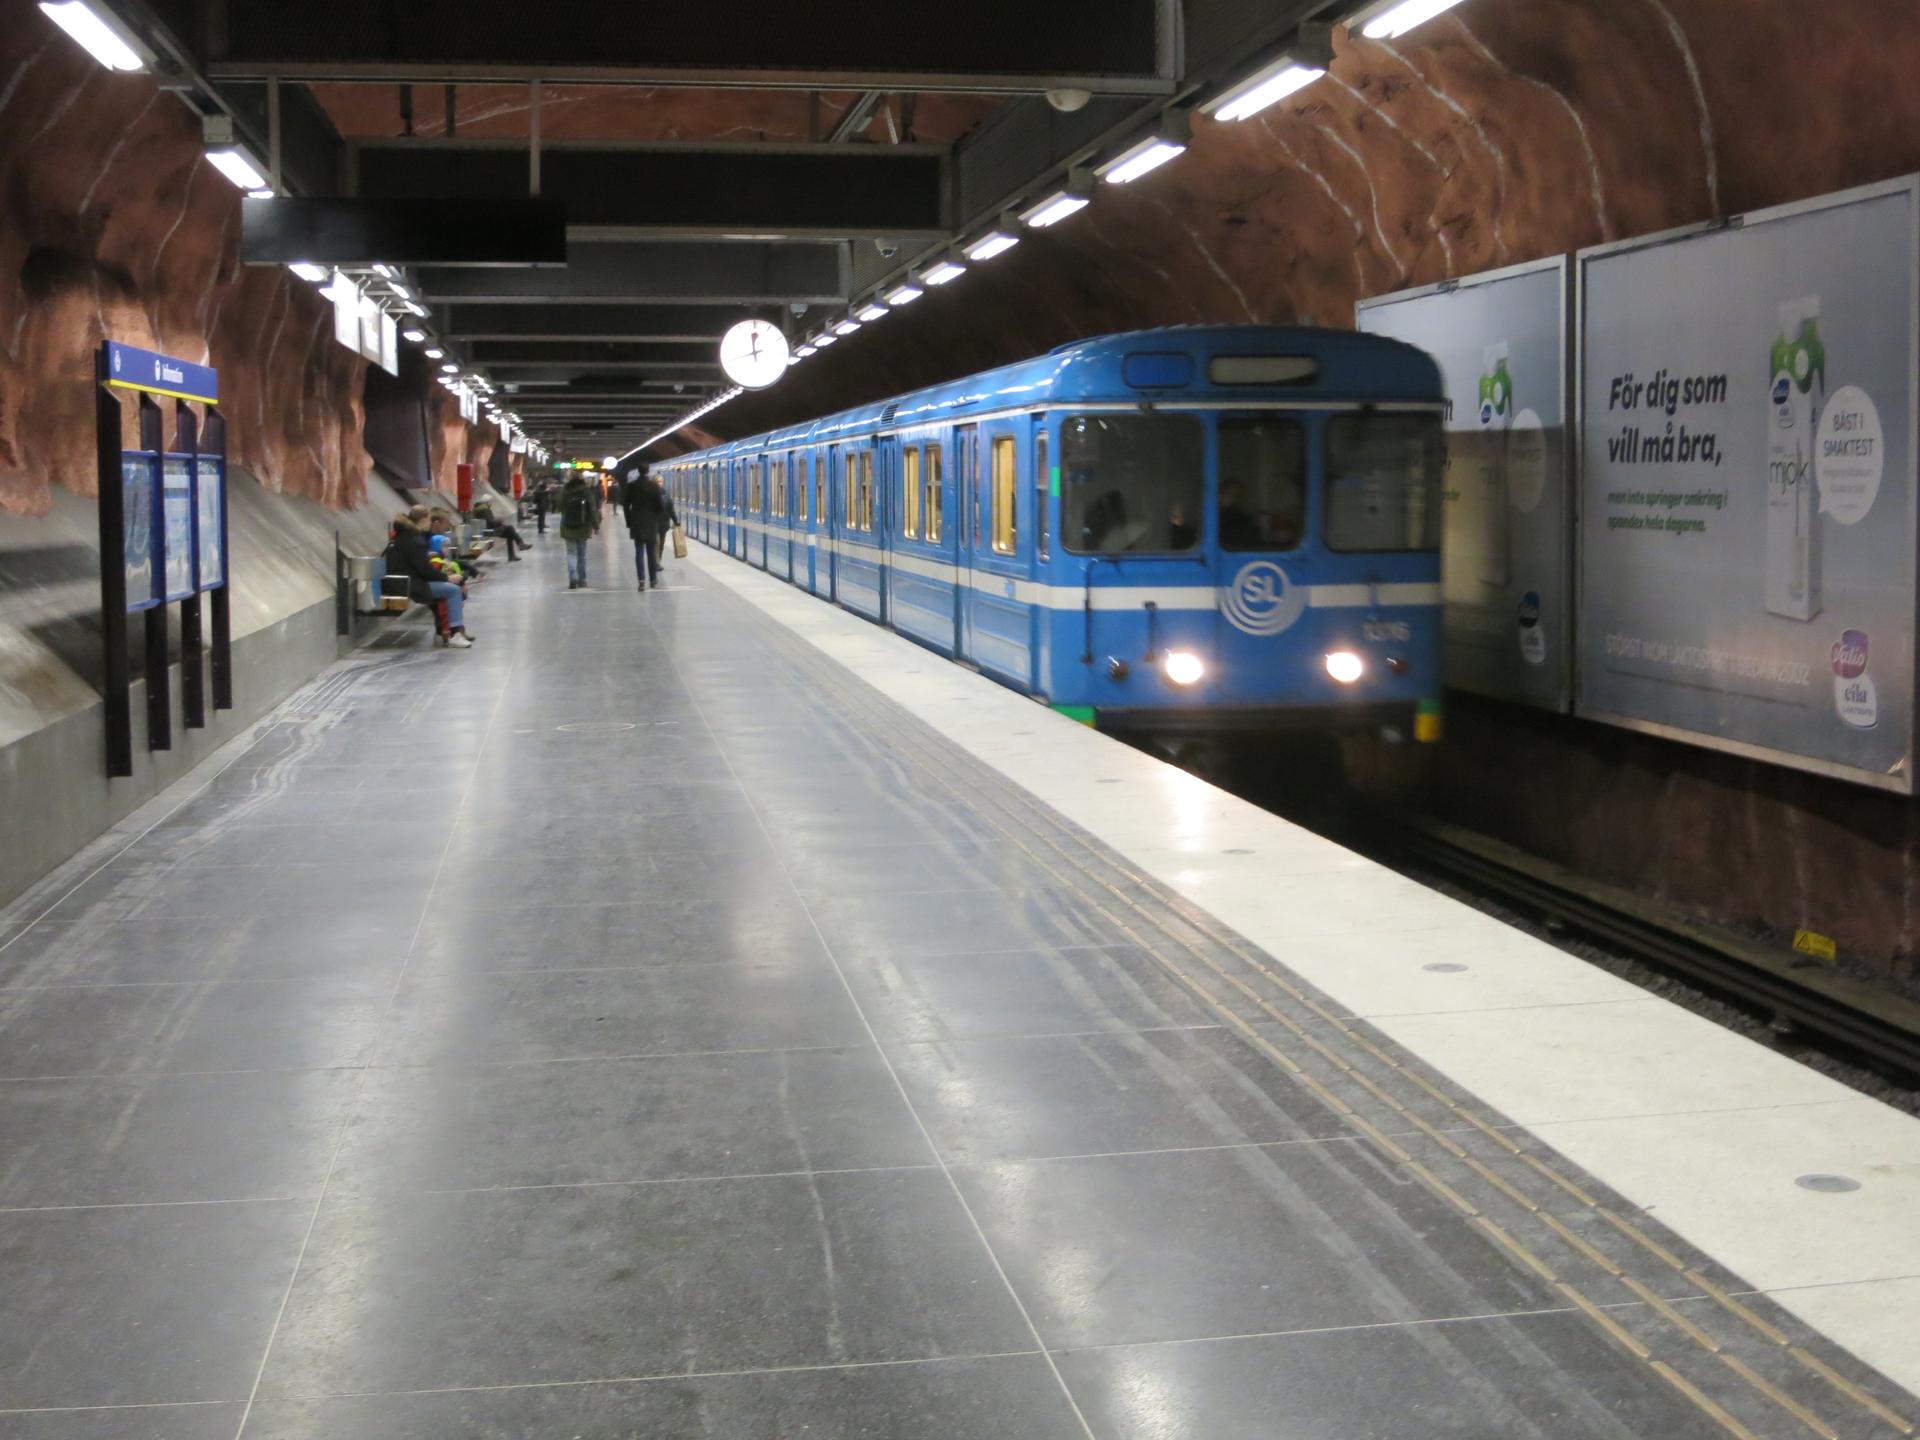 Stockholm's highly-efficient subway system. Trains are known for running frequently and on time. They have large ridership but are not overly crowded because of the frequency of the trains. 